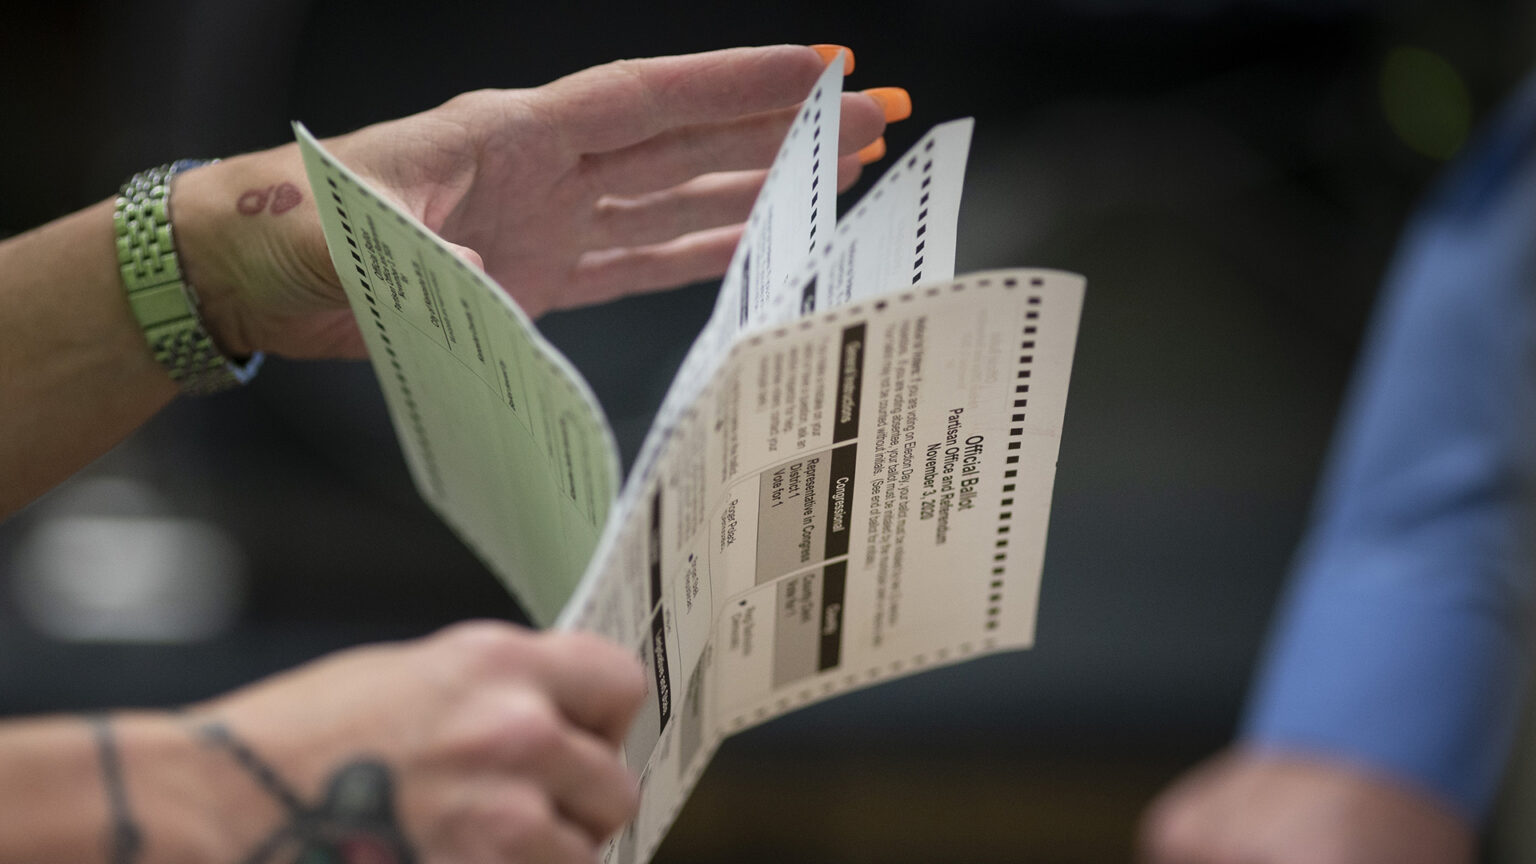 A person holds several ballots in their right hand while gesturing with their left hand.